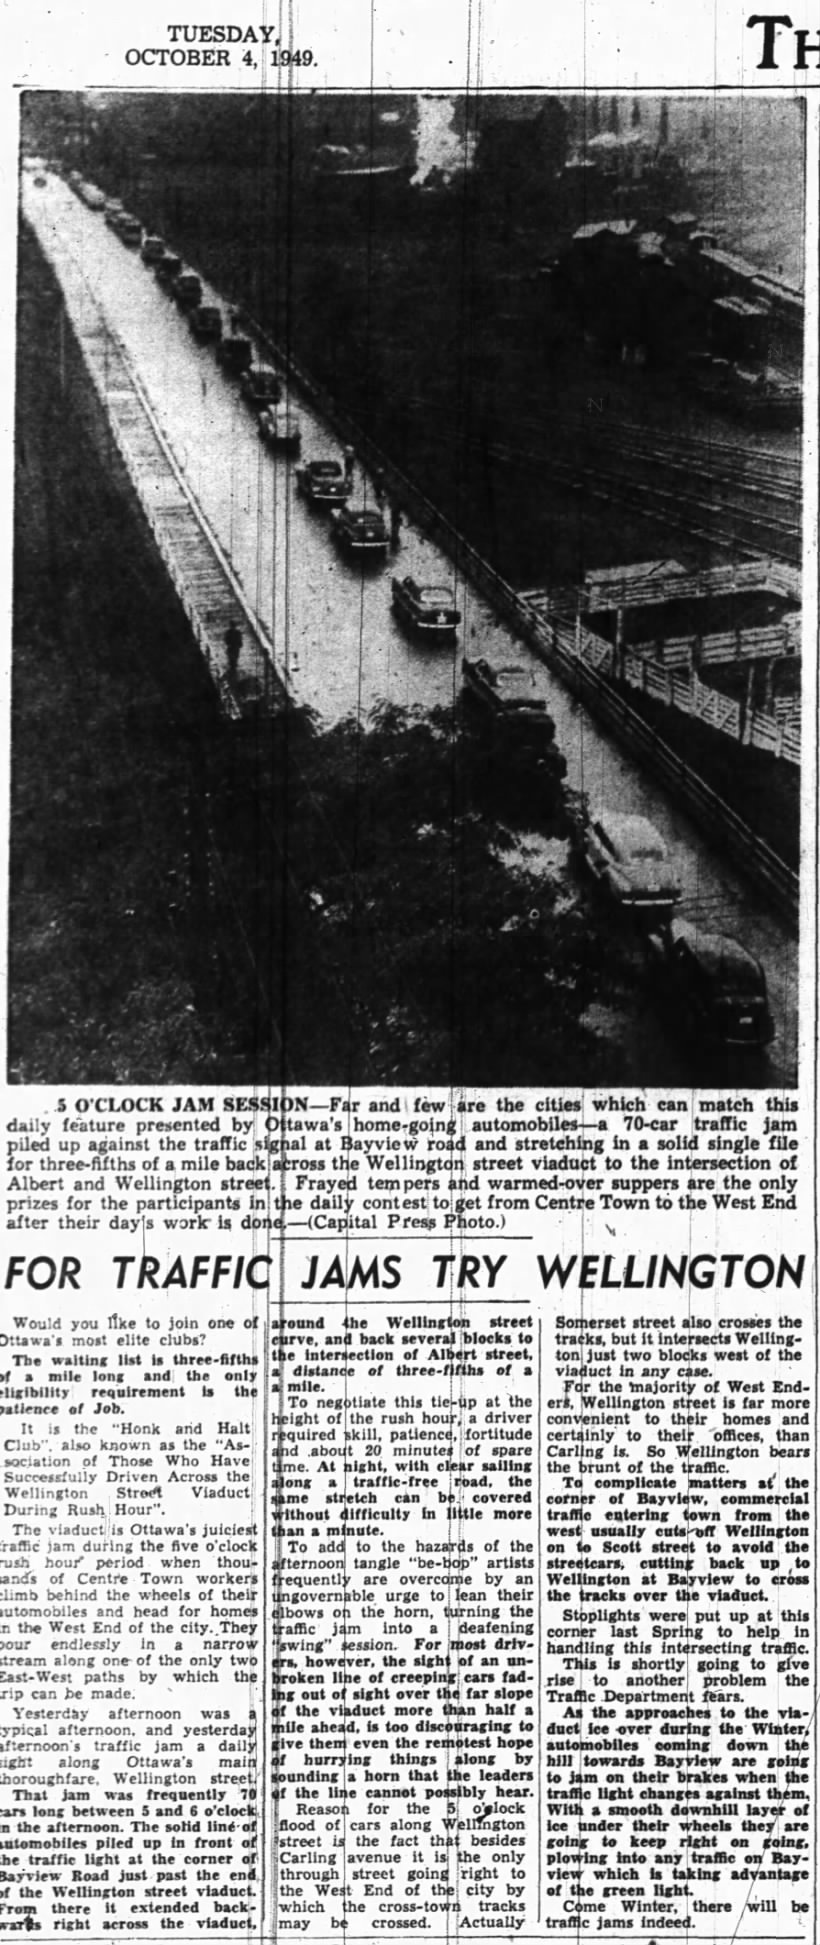 For Traffic Jams Try Wellington